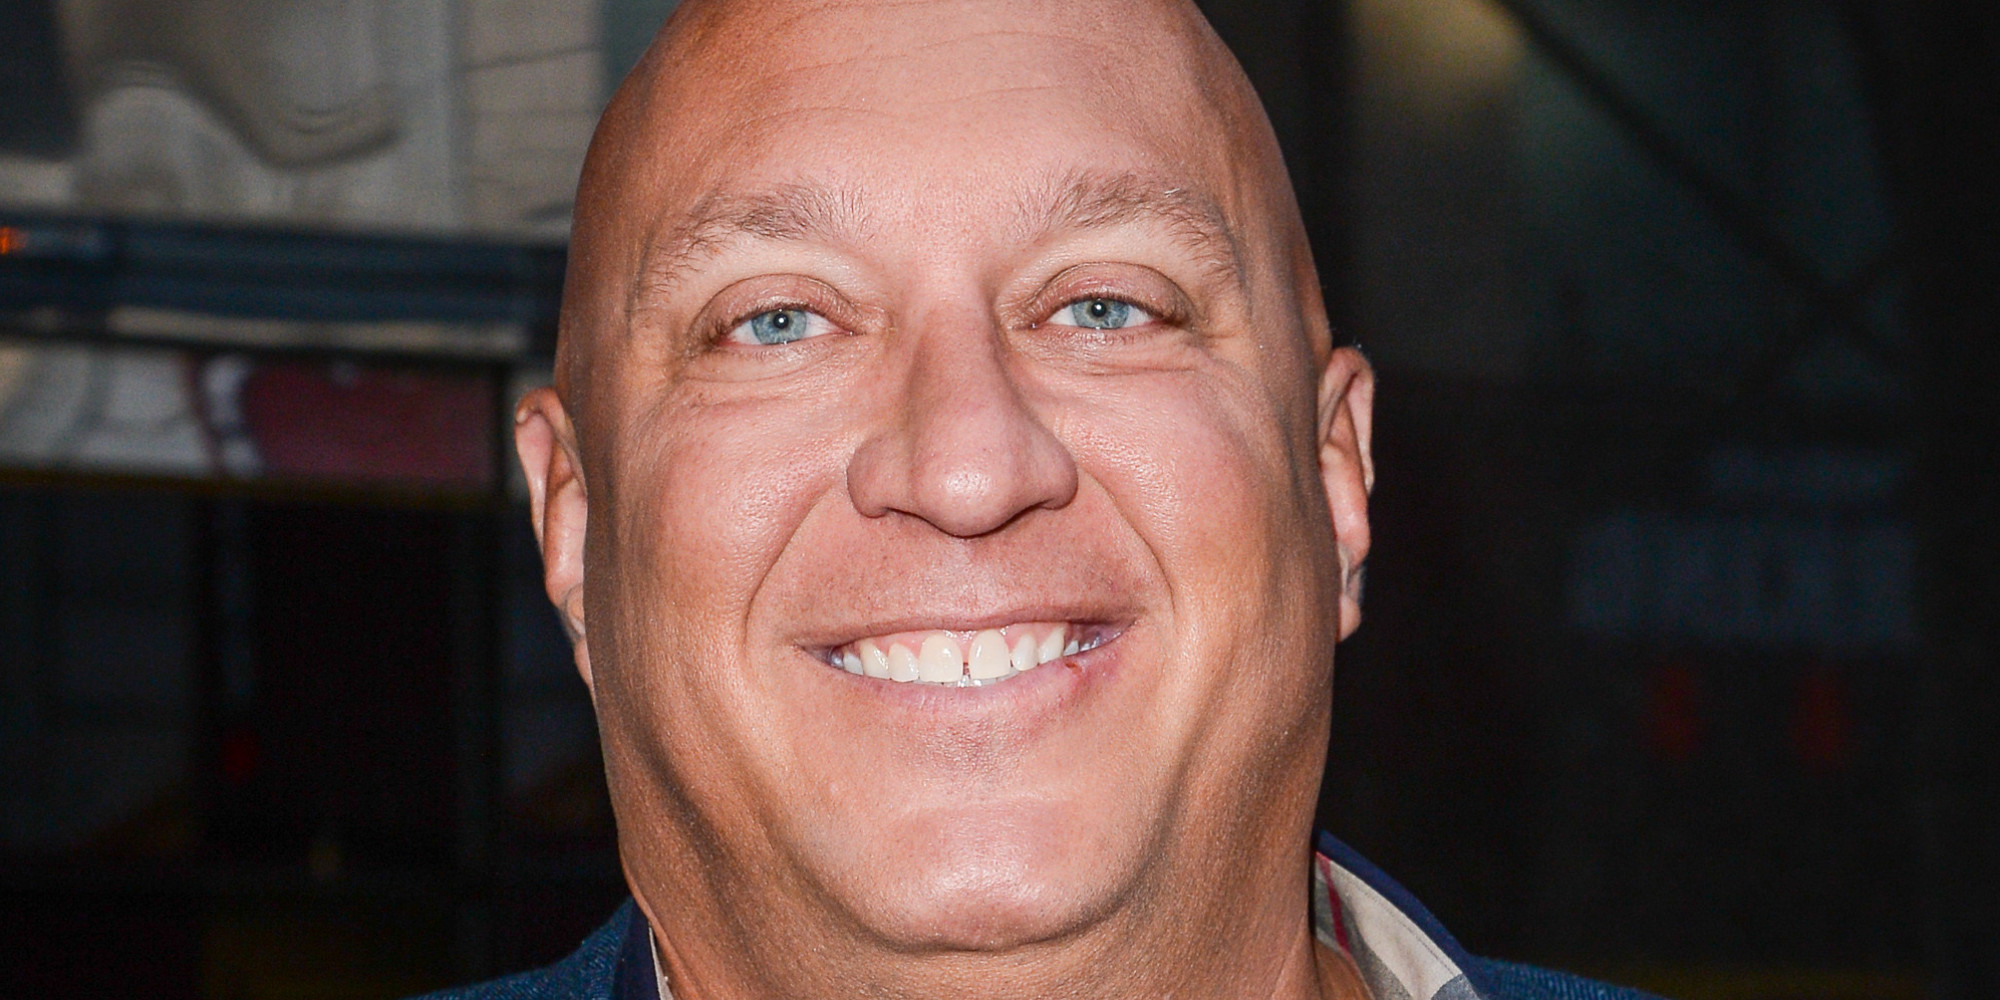 Talk Show Host Steve Wilkos On The Worst Types Of Guests.